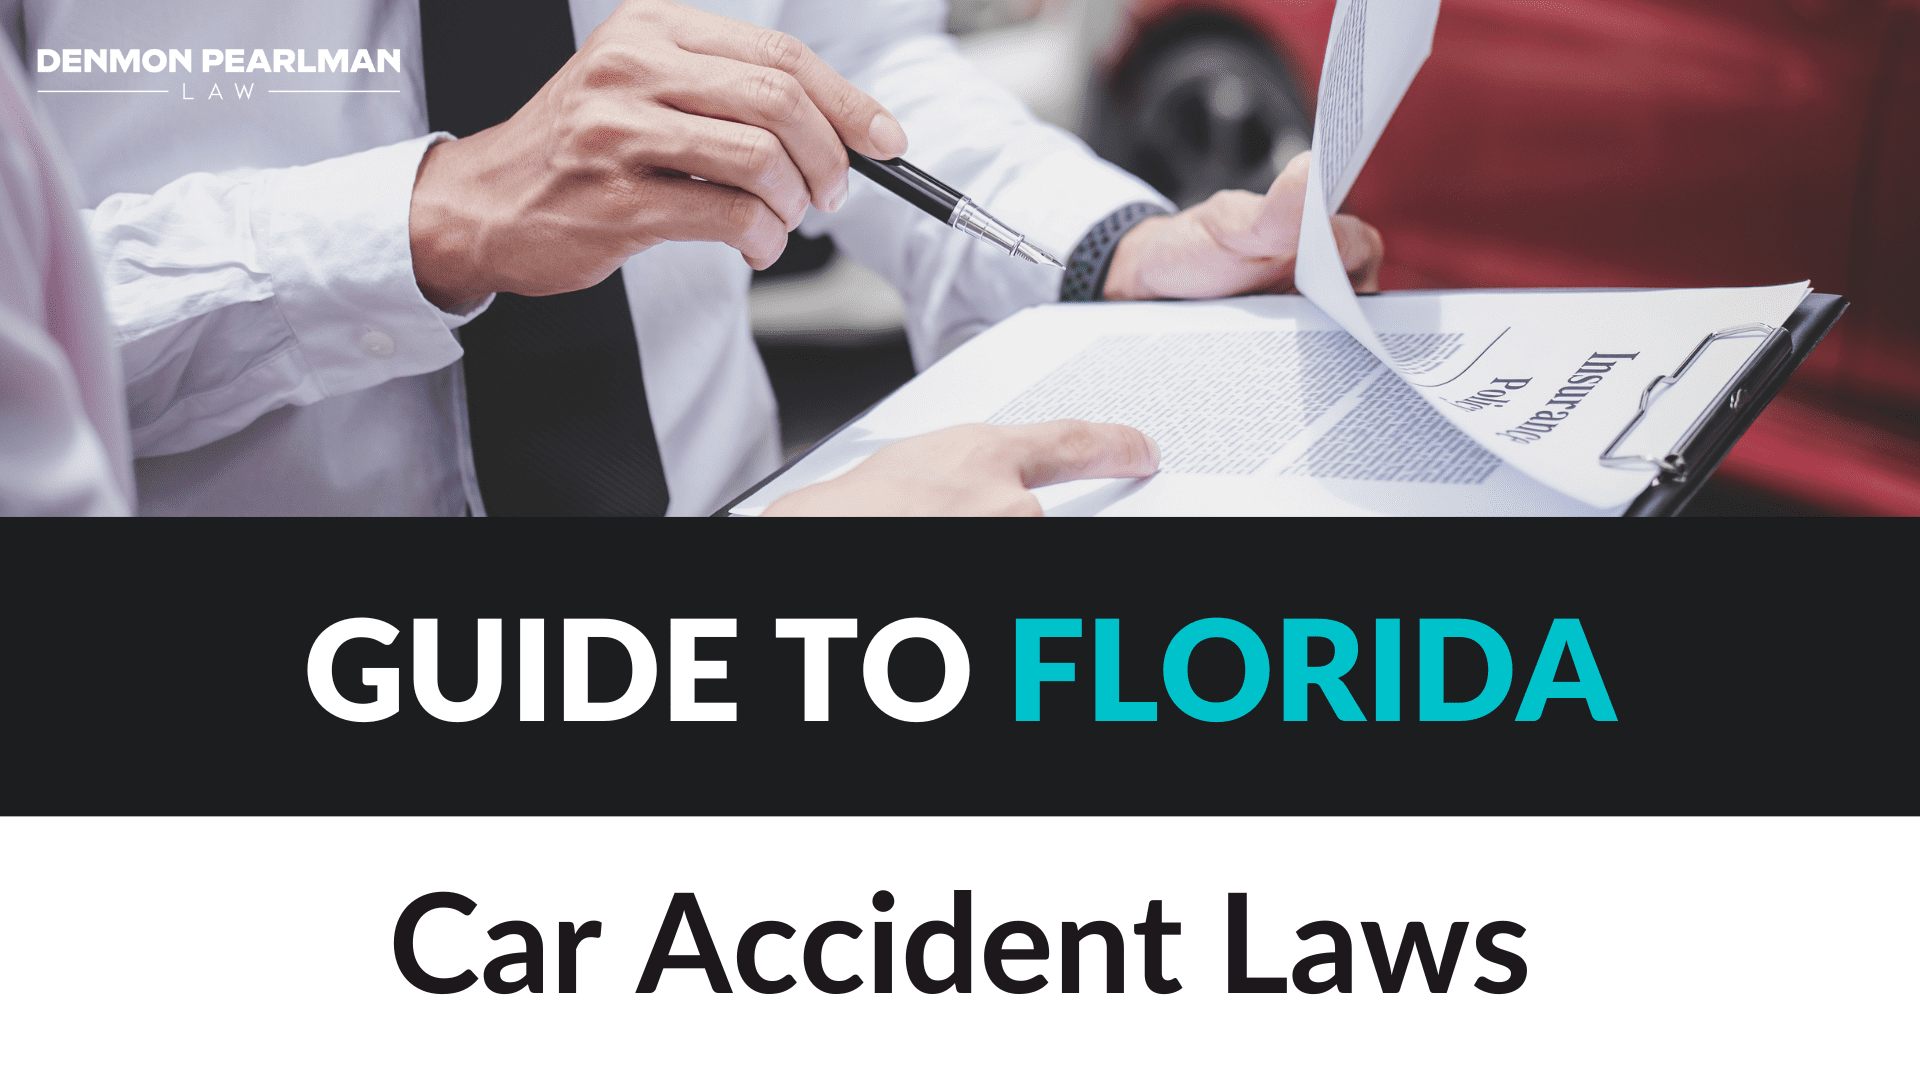 What are the new accident laws in Florida?